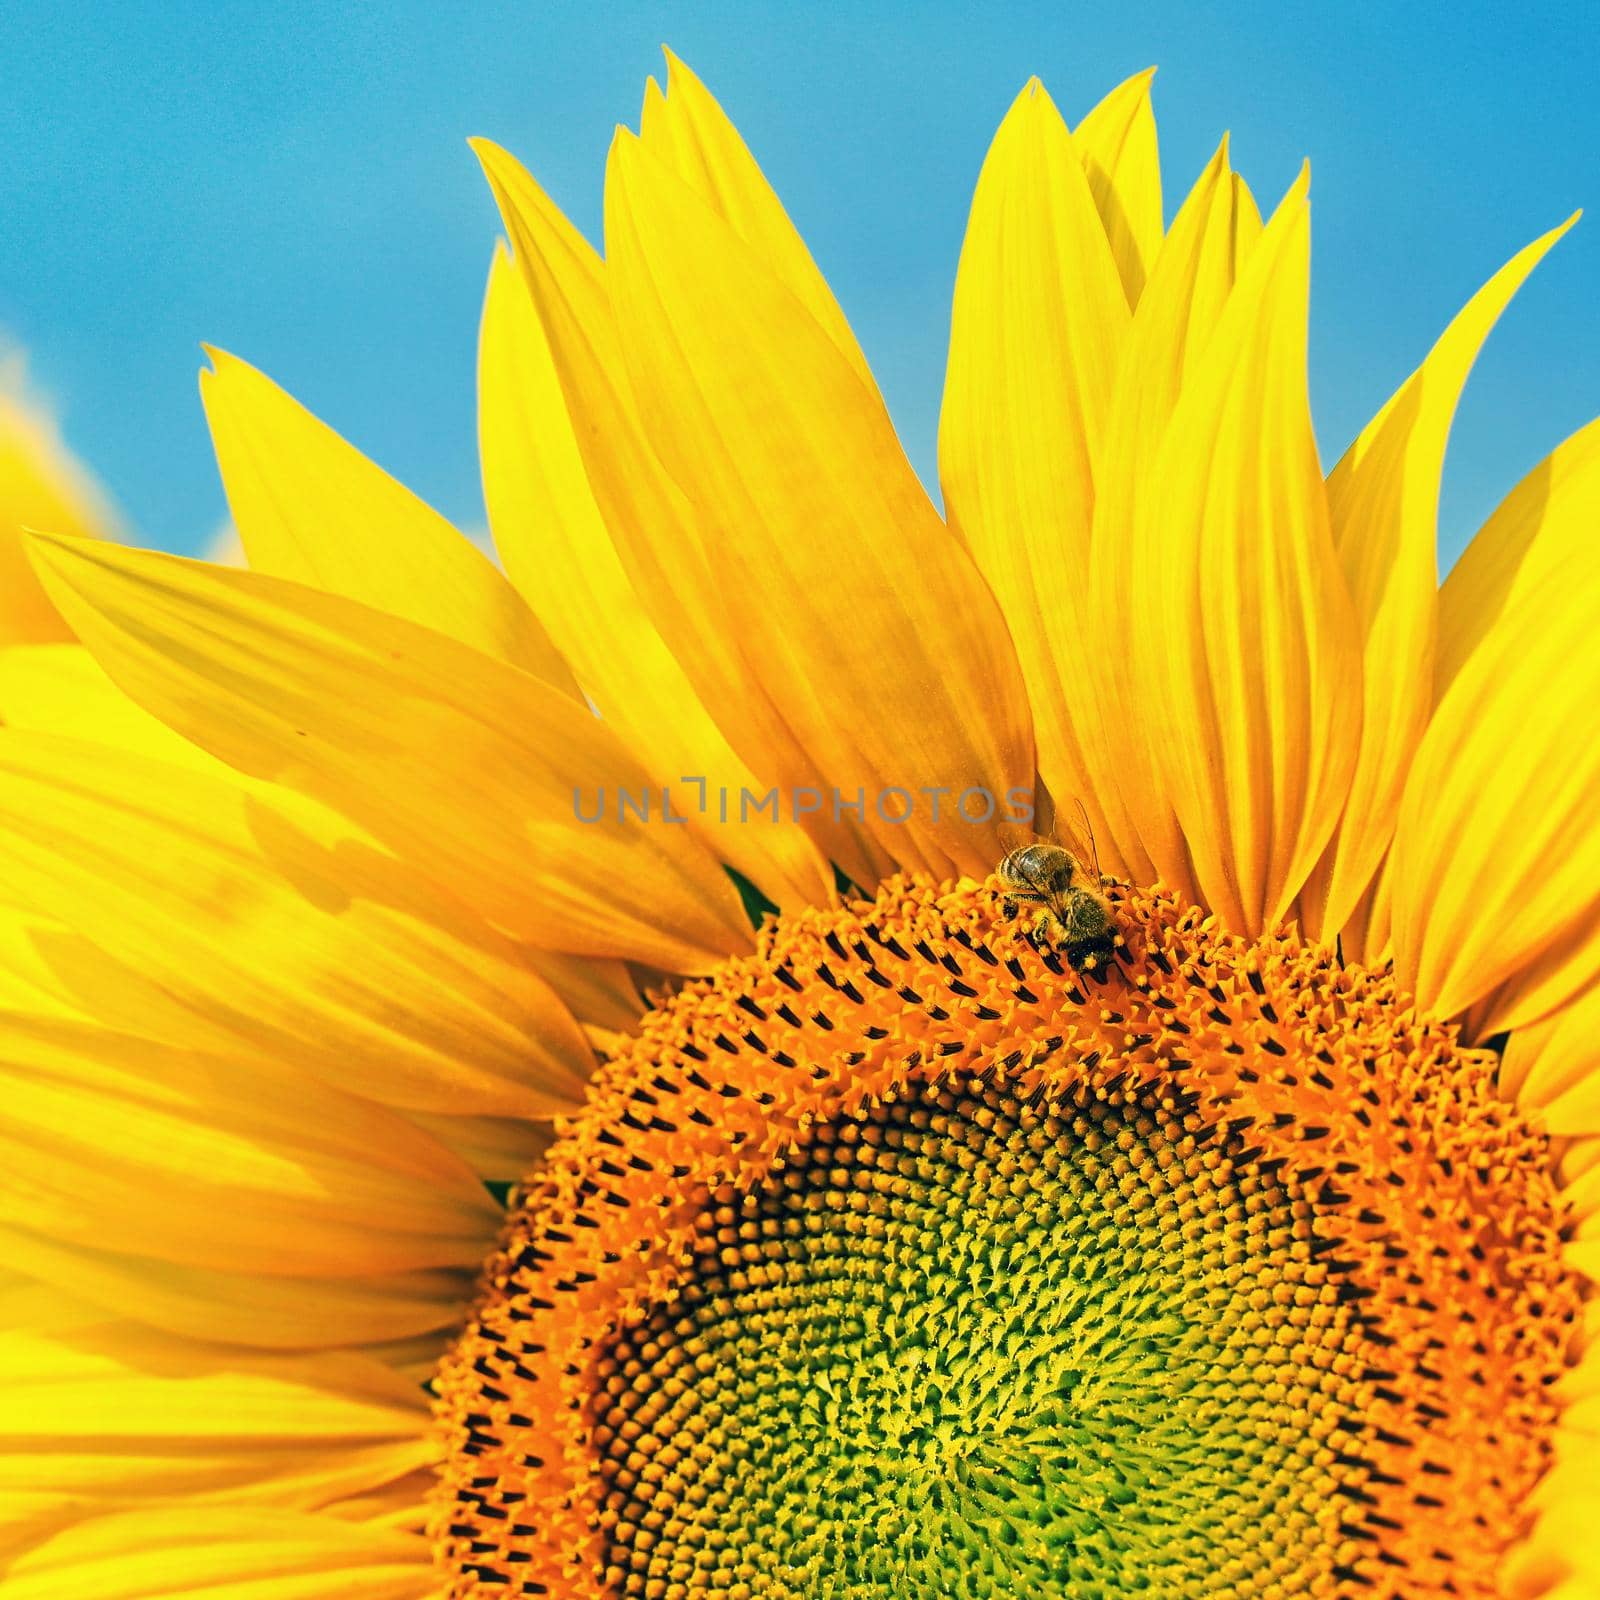 Beautiful yellow flowers - sunflower with bee. Traditional colorful summer background. (Helianthus) by Montypeter